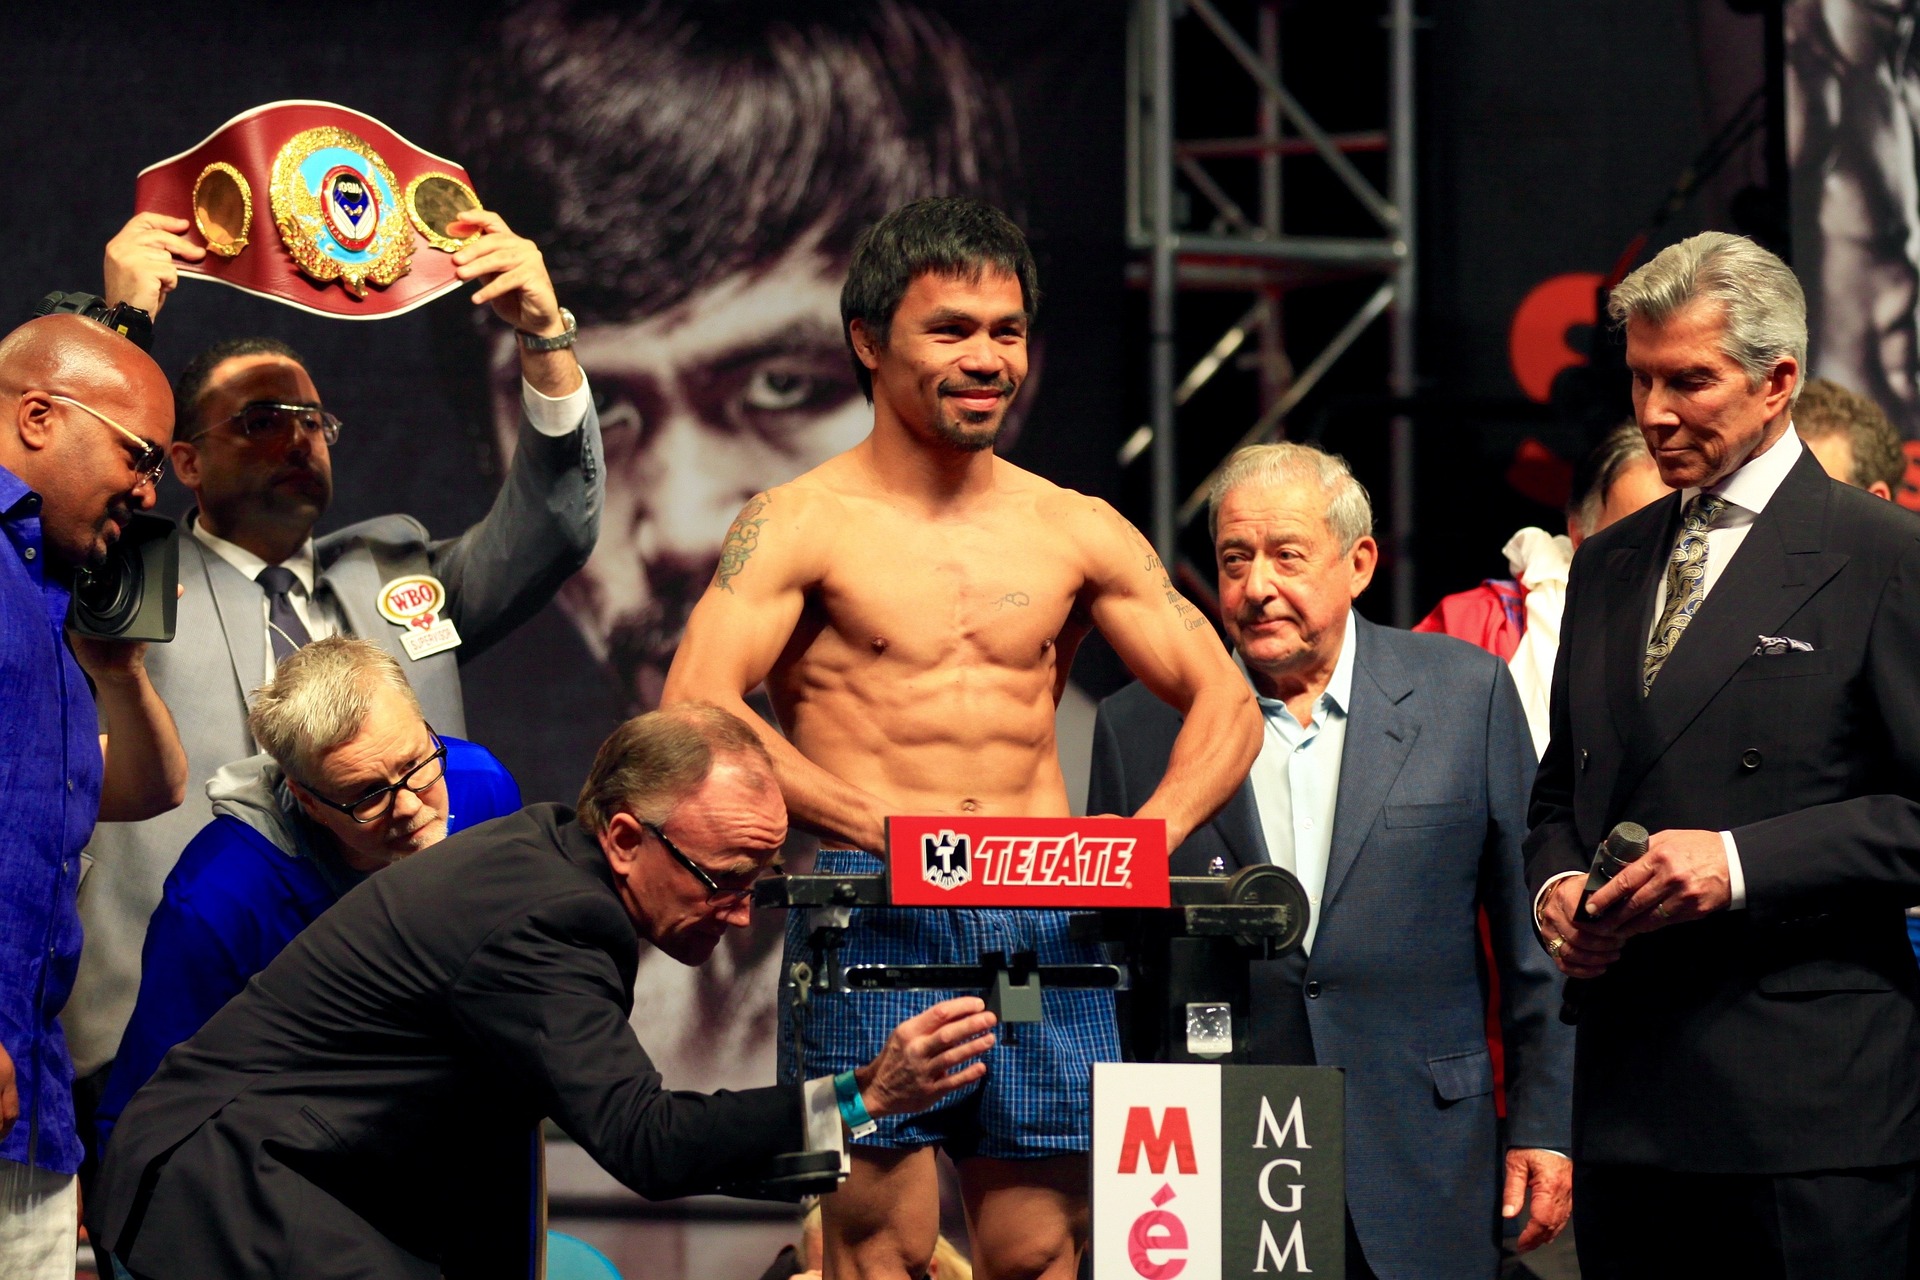 Decline Of Manny Pacquiao - Happening Faster Than Mayweather